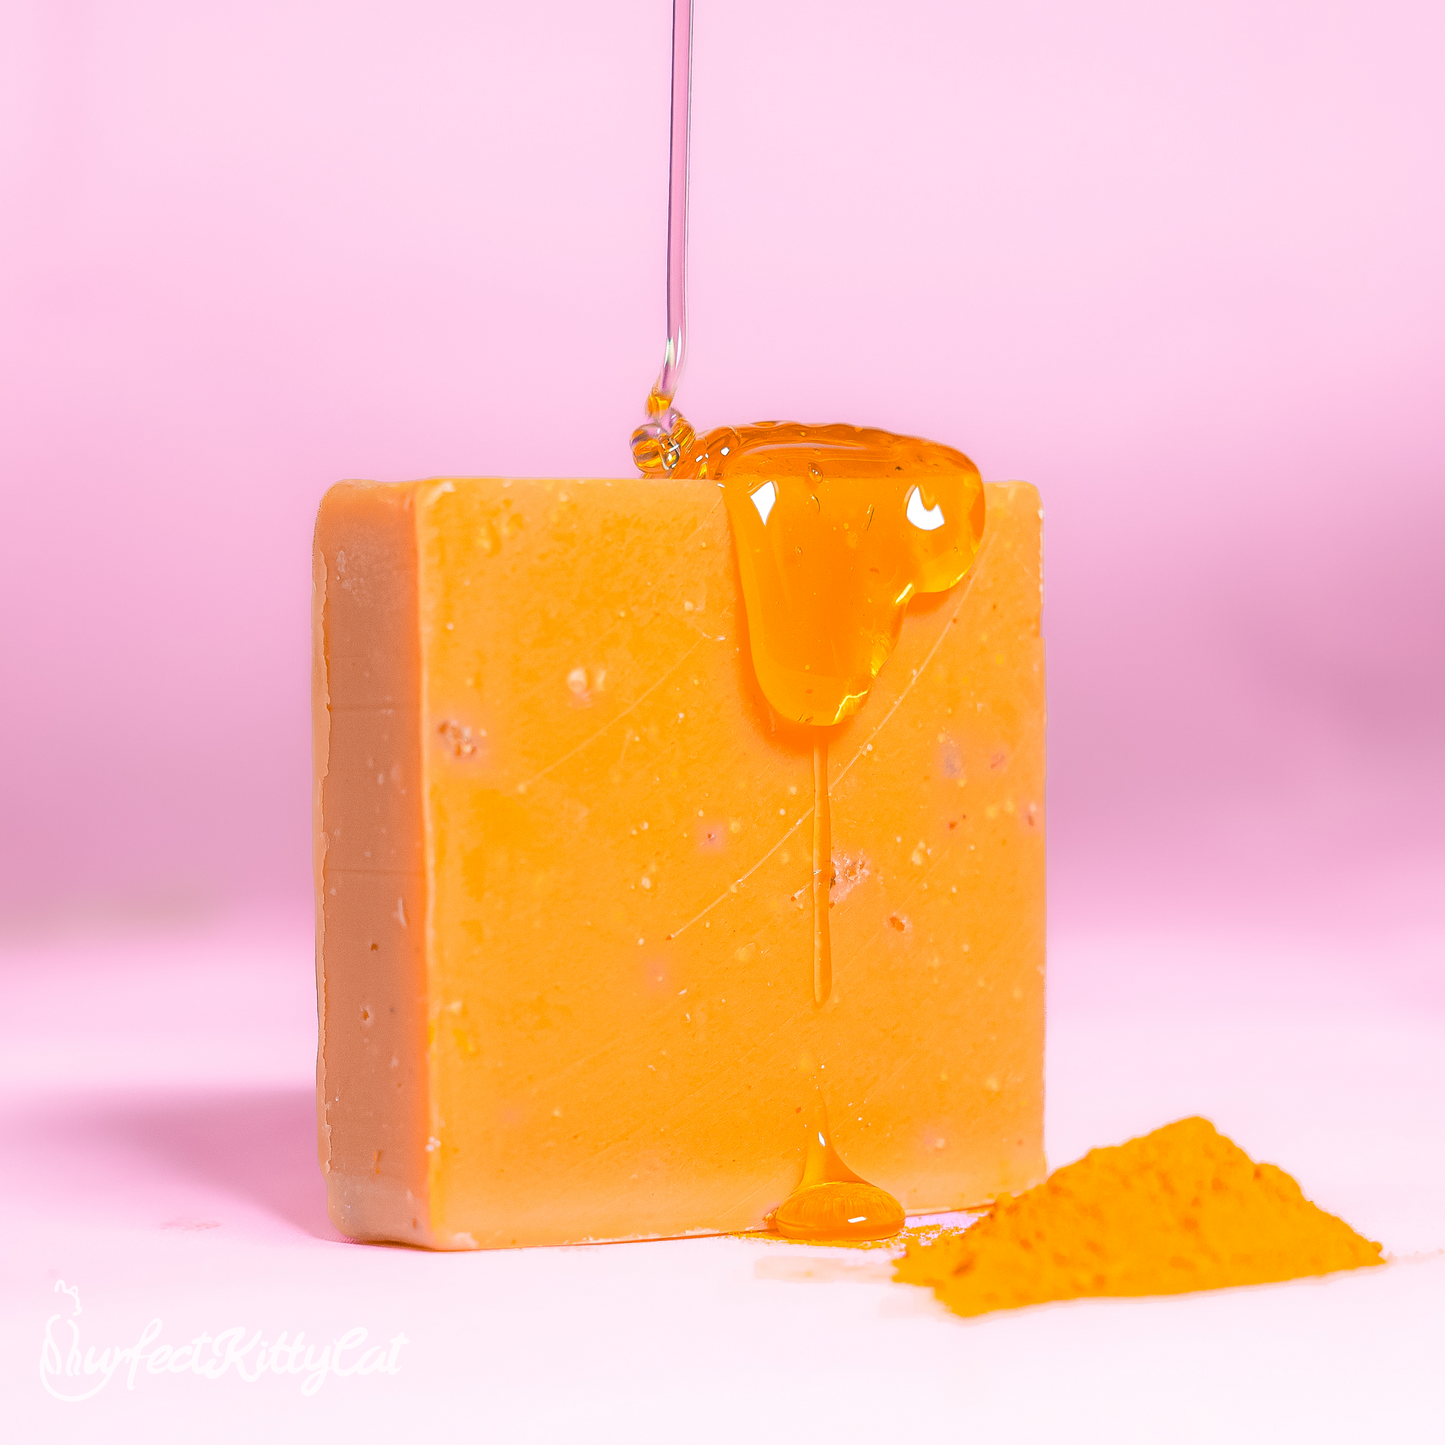 Natural Handcrafted Turmeric and Sweet Orange Bar Soap – Honey and Grace  Soap Co.